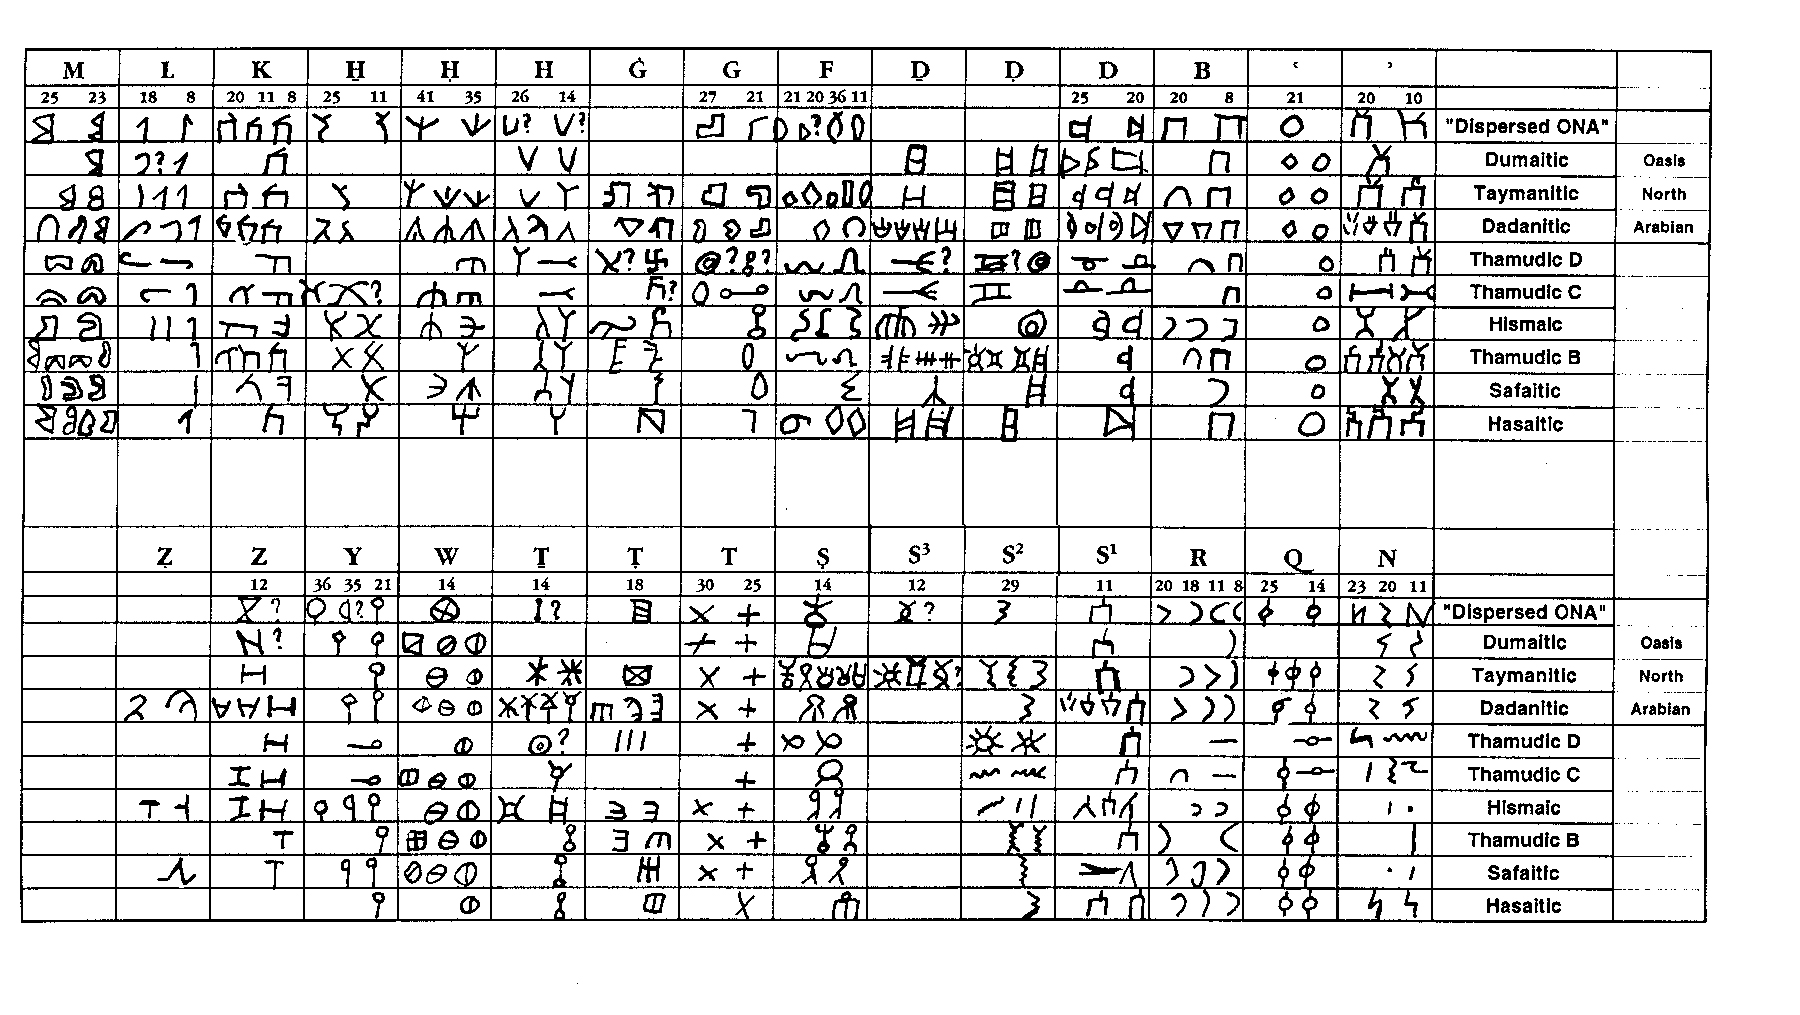 Table showing the various scripts that were used in Ancient North Arabia